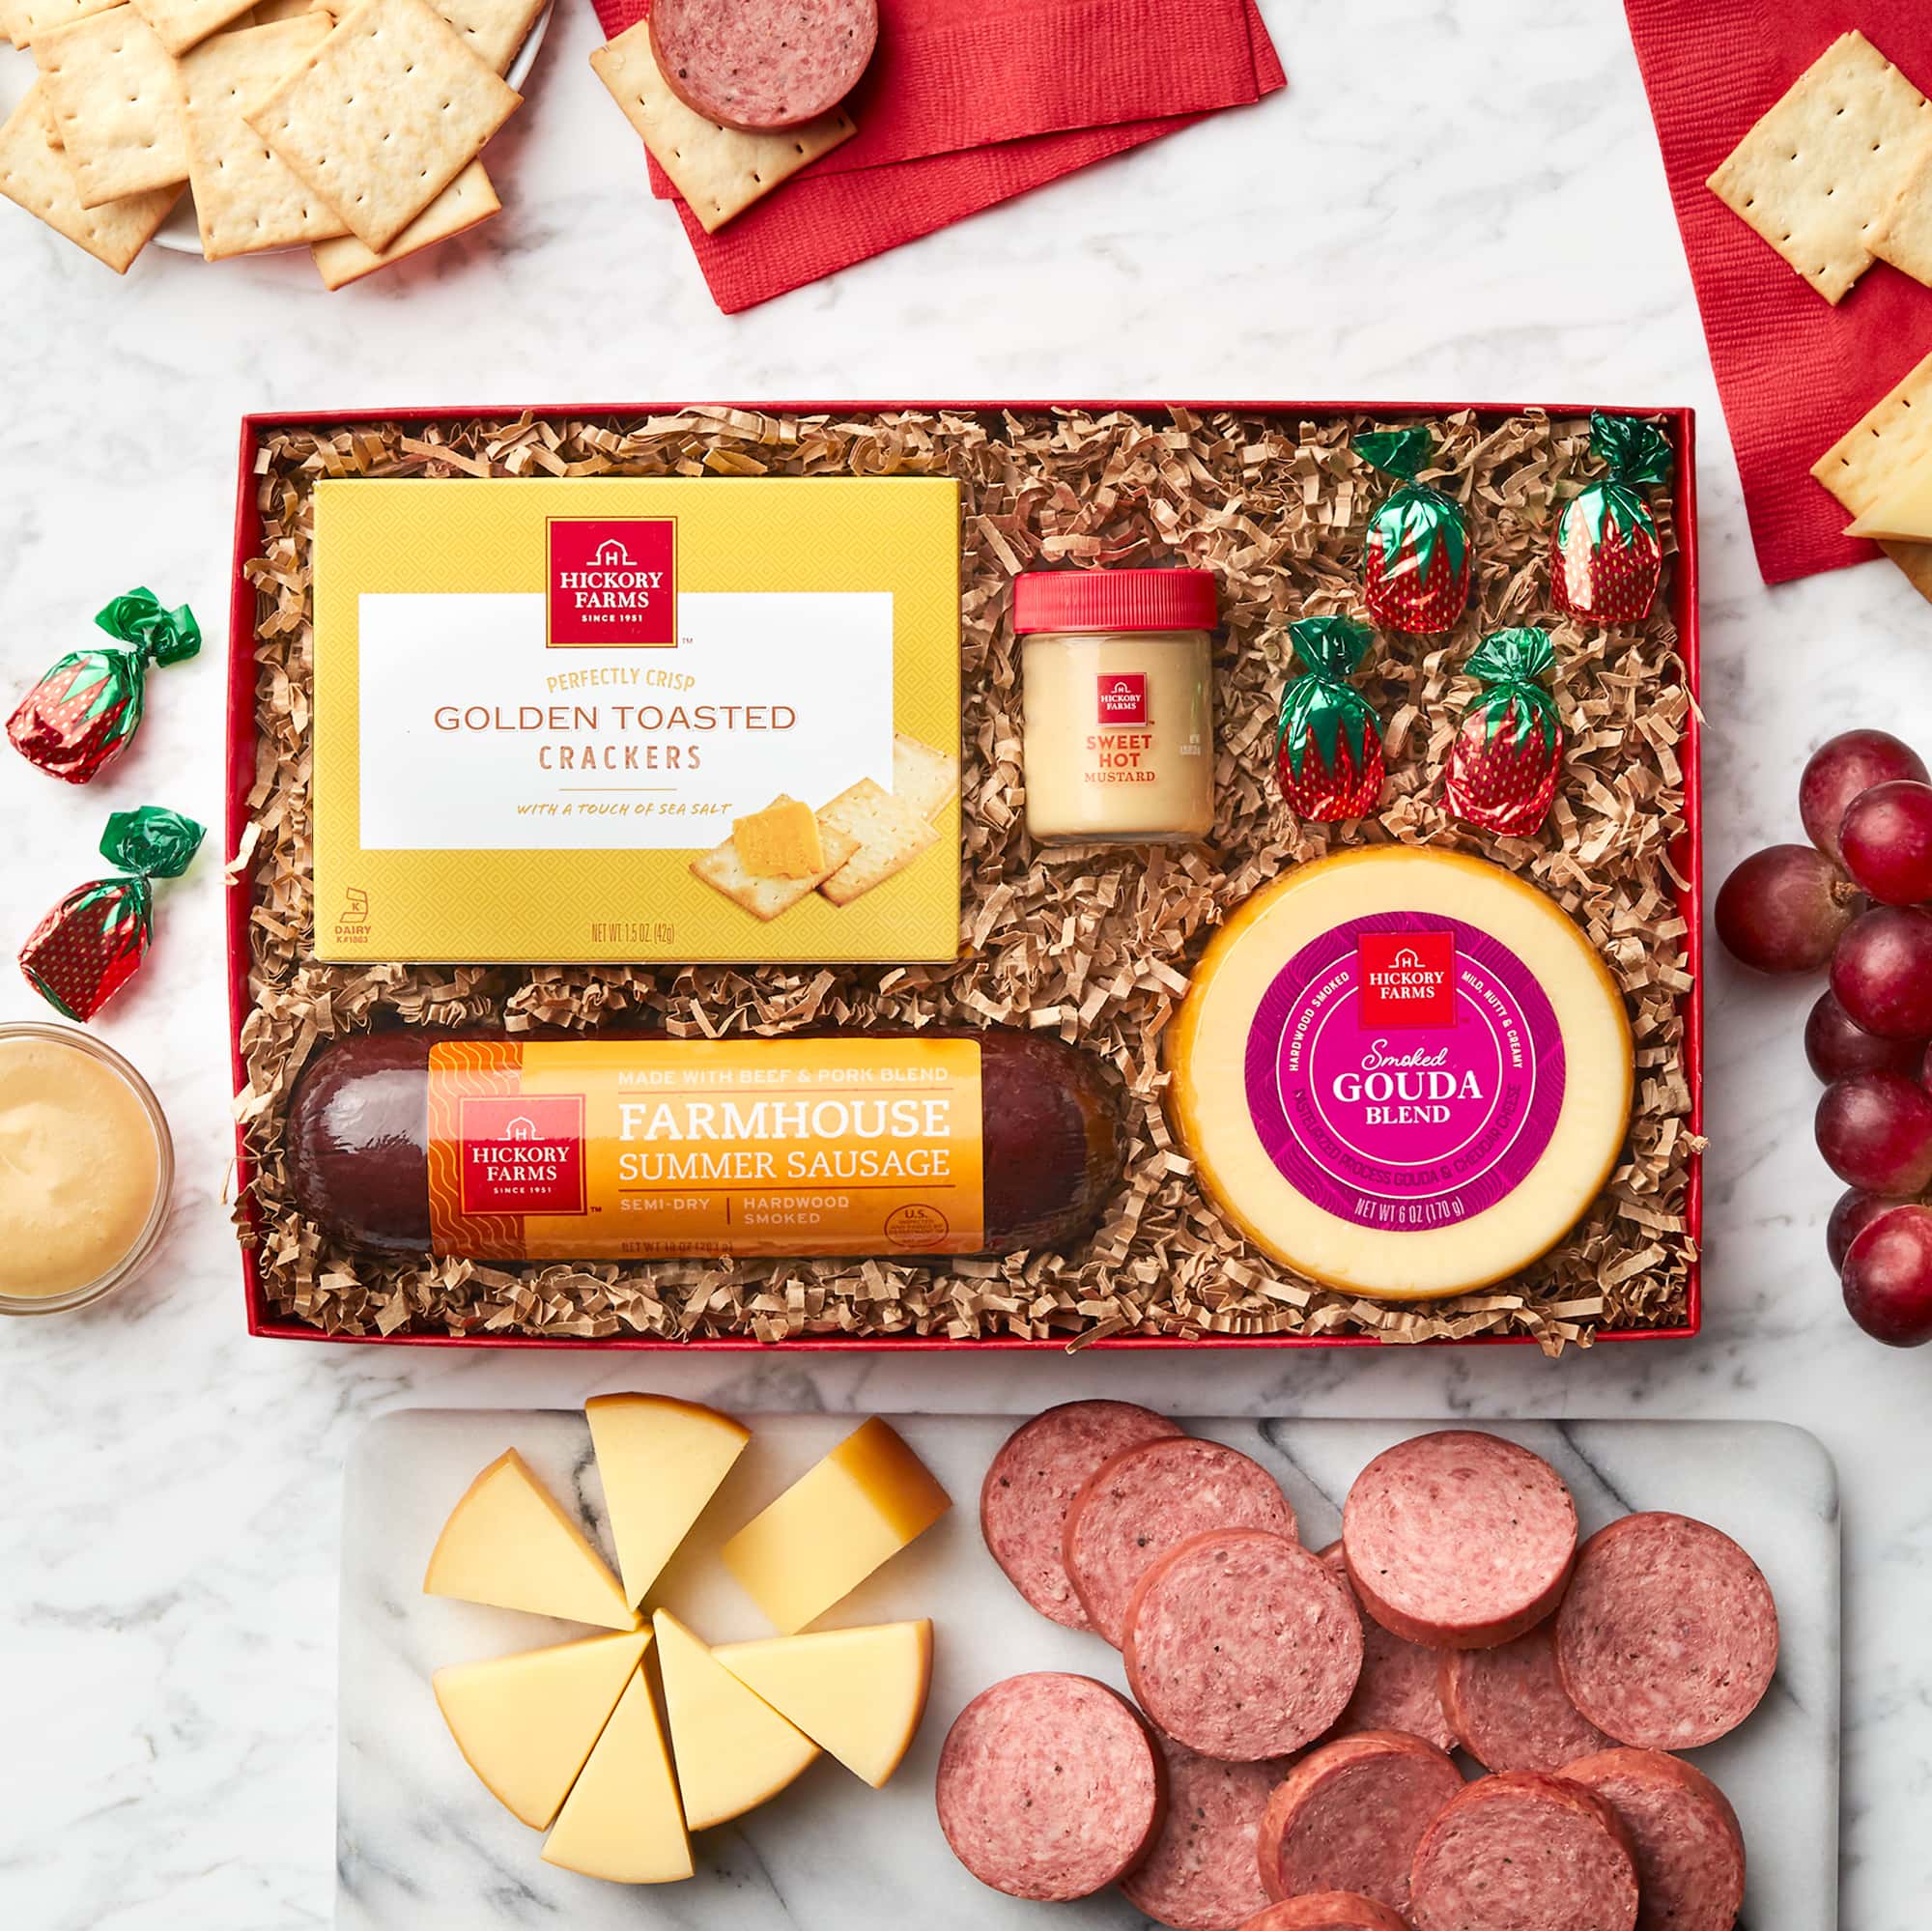 https://www.hickoryfarms.com/on/demandware.static/-/Sites-Web-Master-Catalog/default/dwc2c3e2fb/images/products/hearty-holiday-favorites-gift-box-12968WI-1.jpg